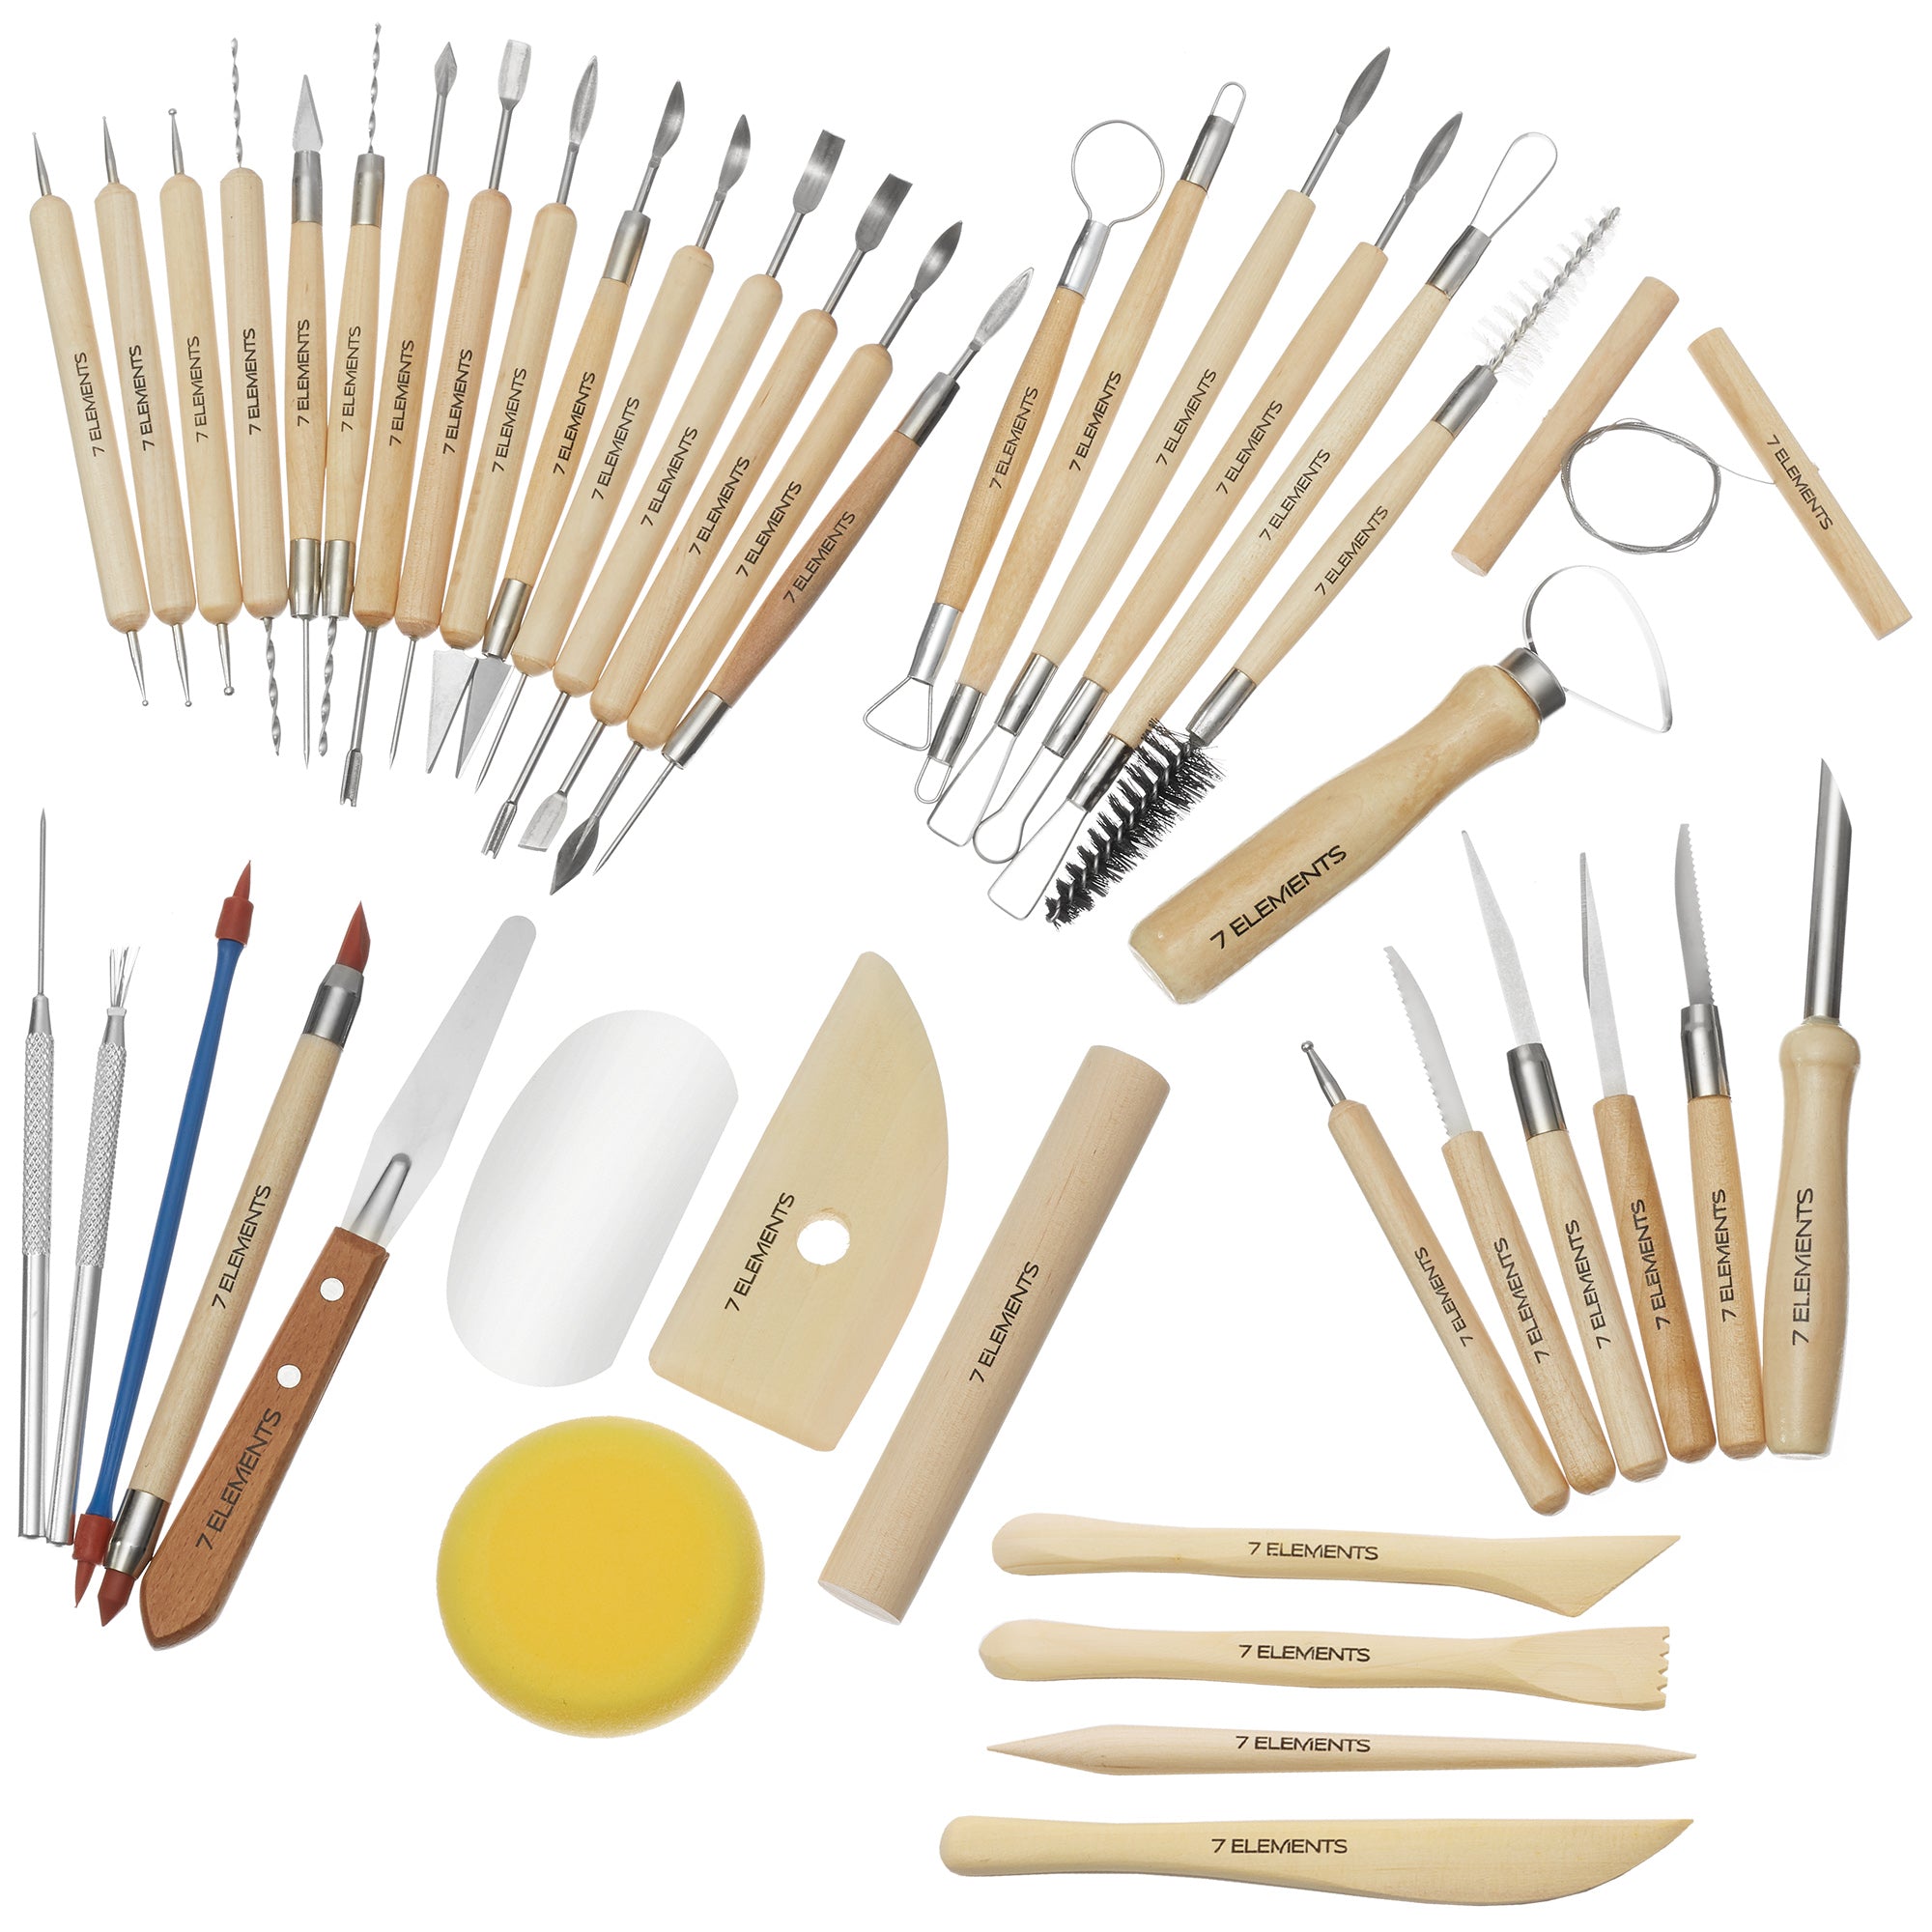 Artzuvs Pottery Tools,42Pcs Clay Sculpting Tools Kits with Plastic Box for  Ceramic Carving Polymer Modeling